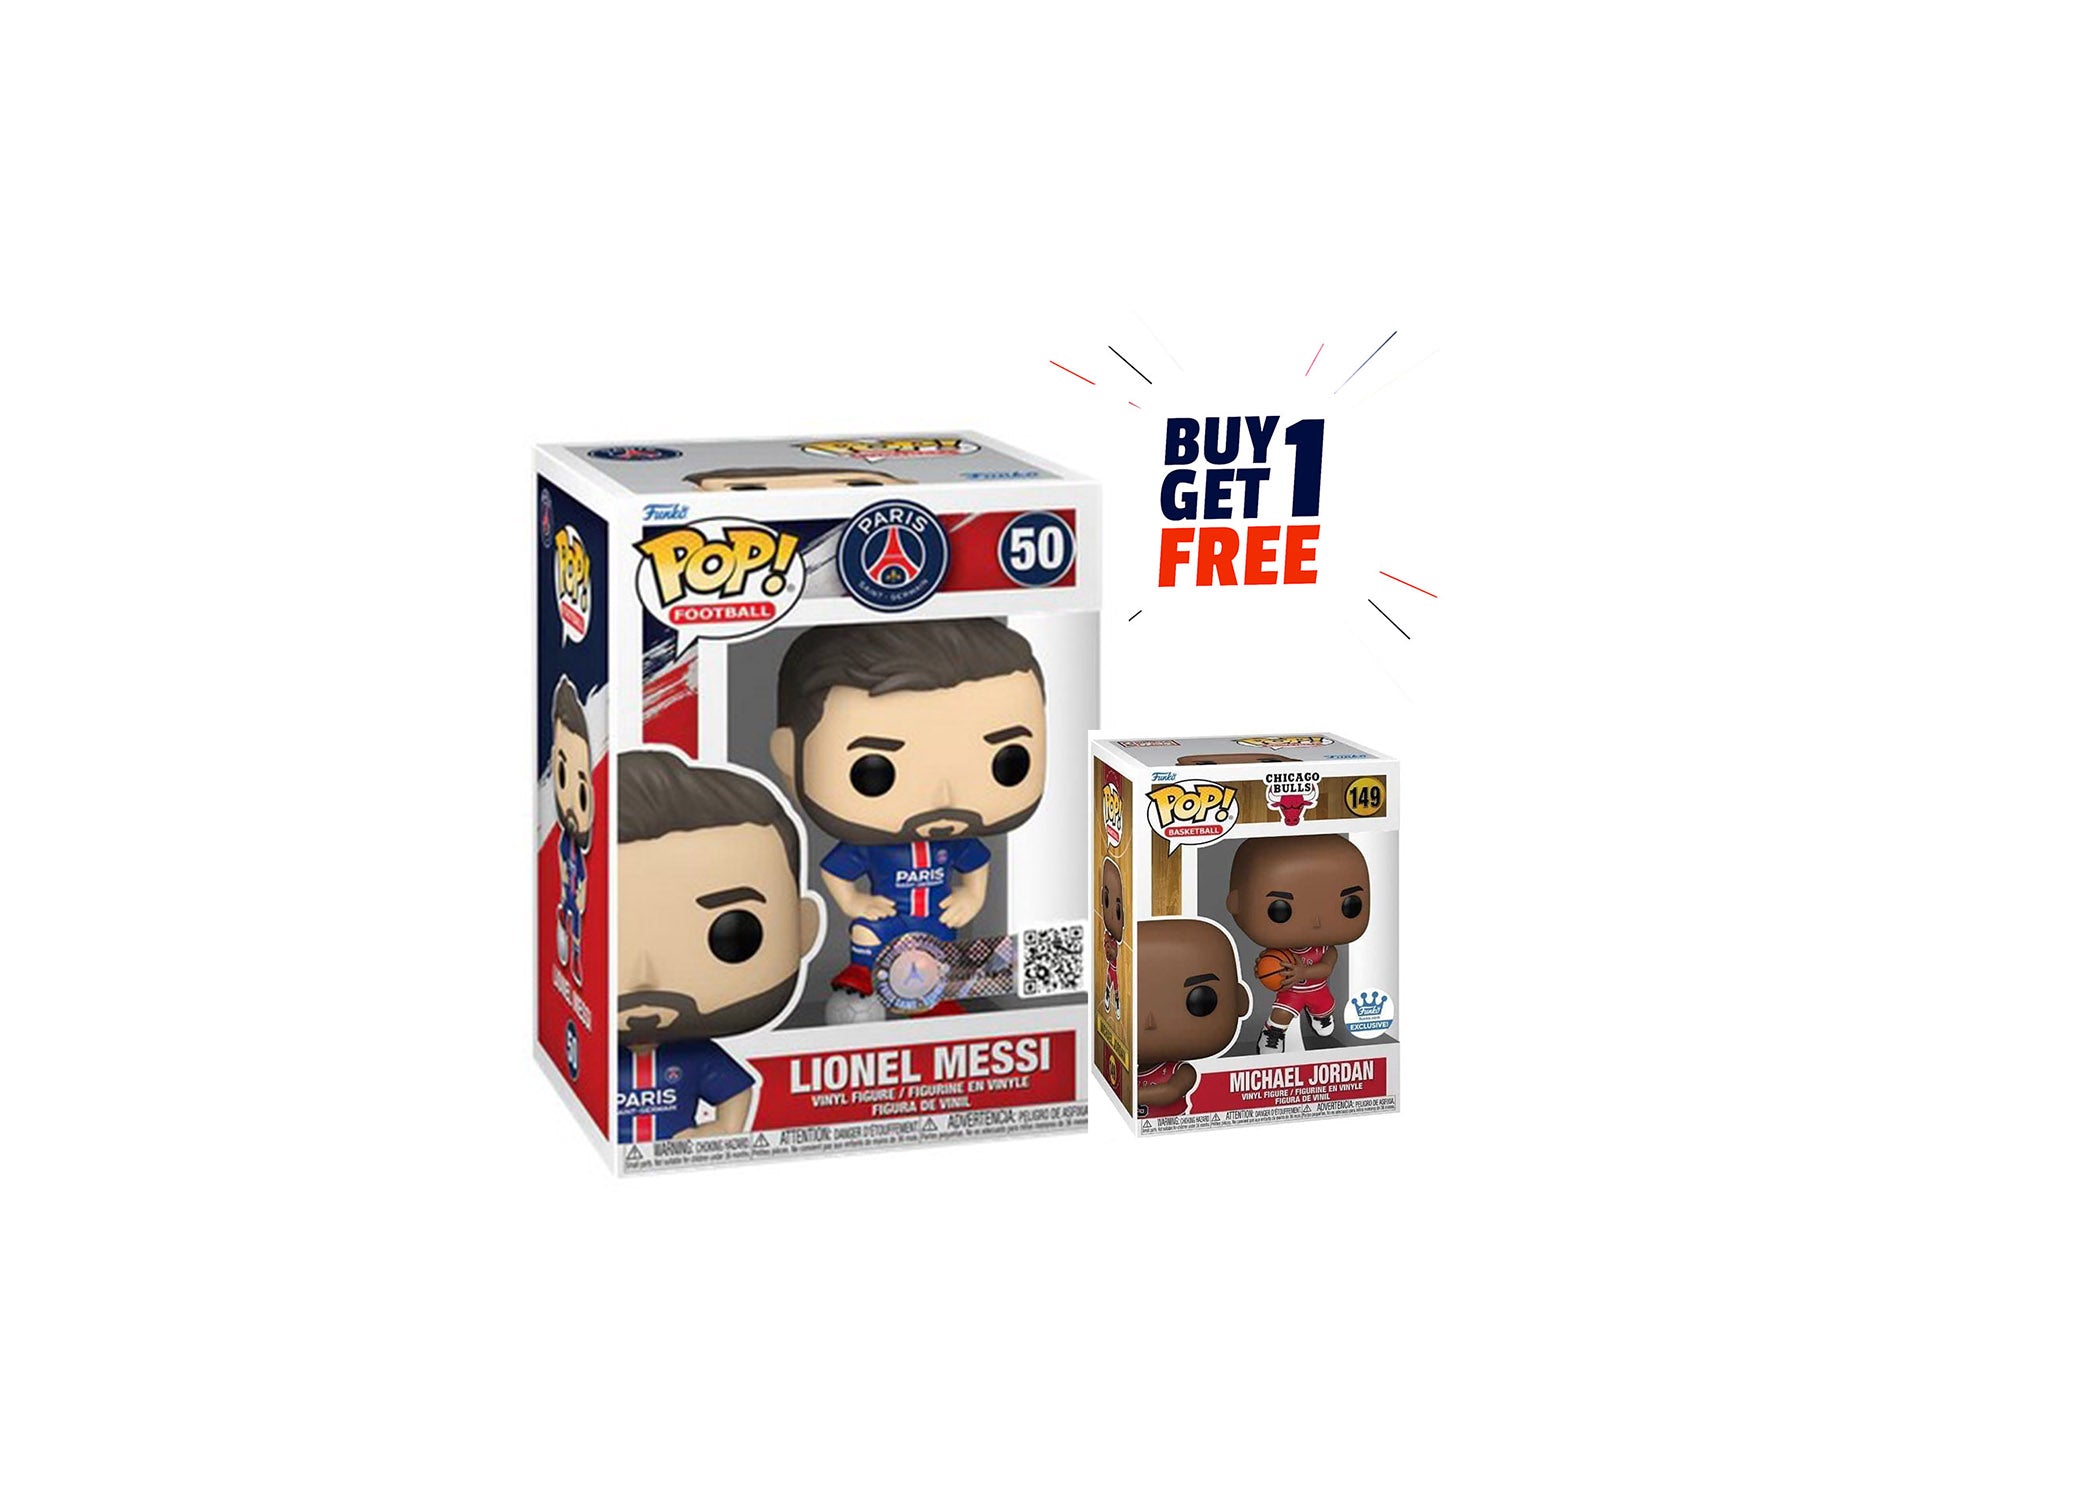 Lionel Messi Funko Pop — About The Pop!